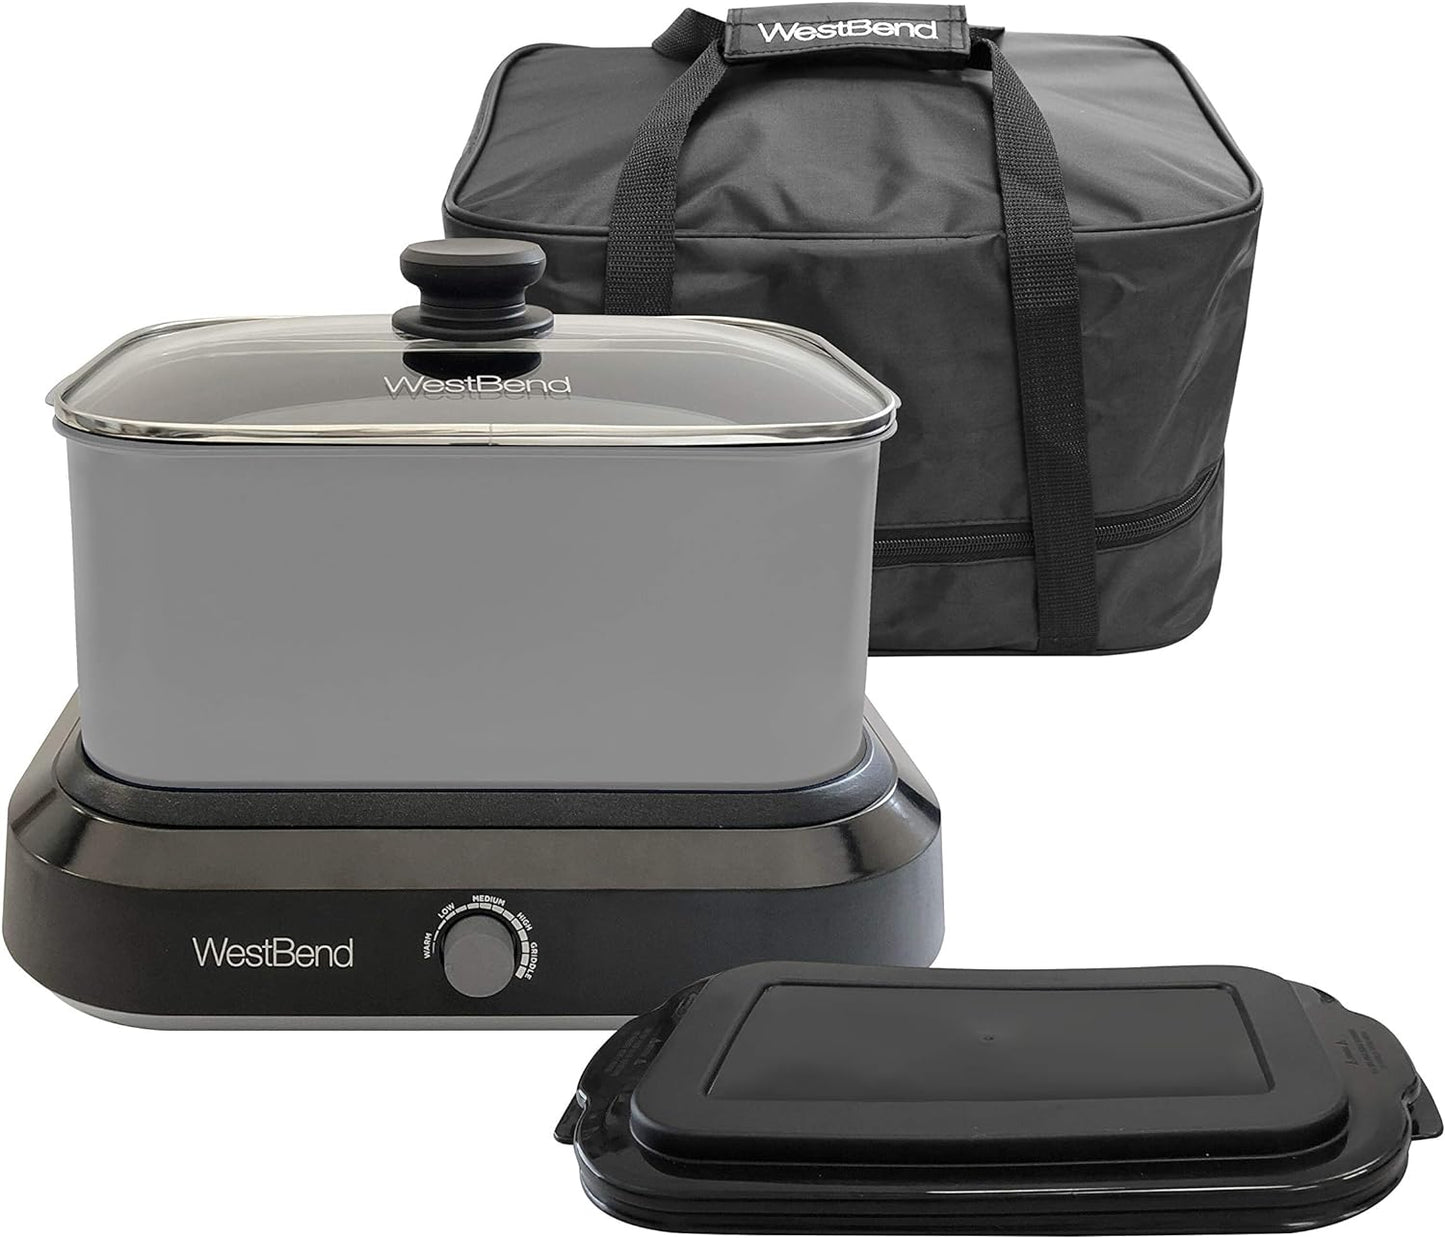 West Bend 87906 Slow Cooker, Large-Capacity Non-Stick Vessel with Variable Temperature Control, Travel Lid and Thermal Carrying Case, 6 Qt, Silver